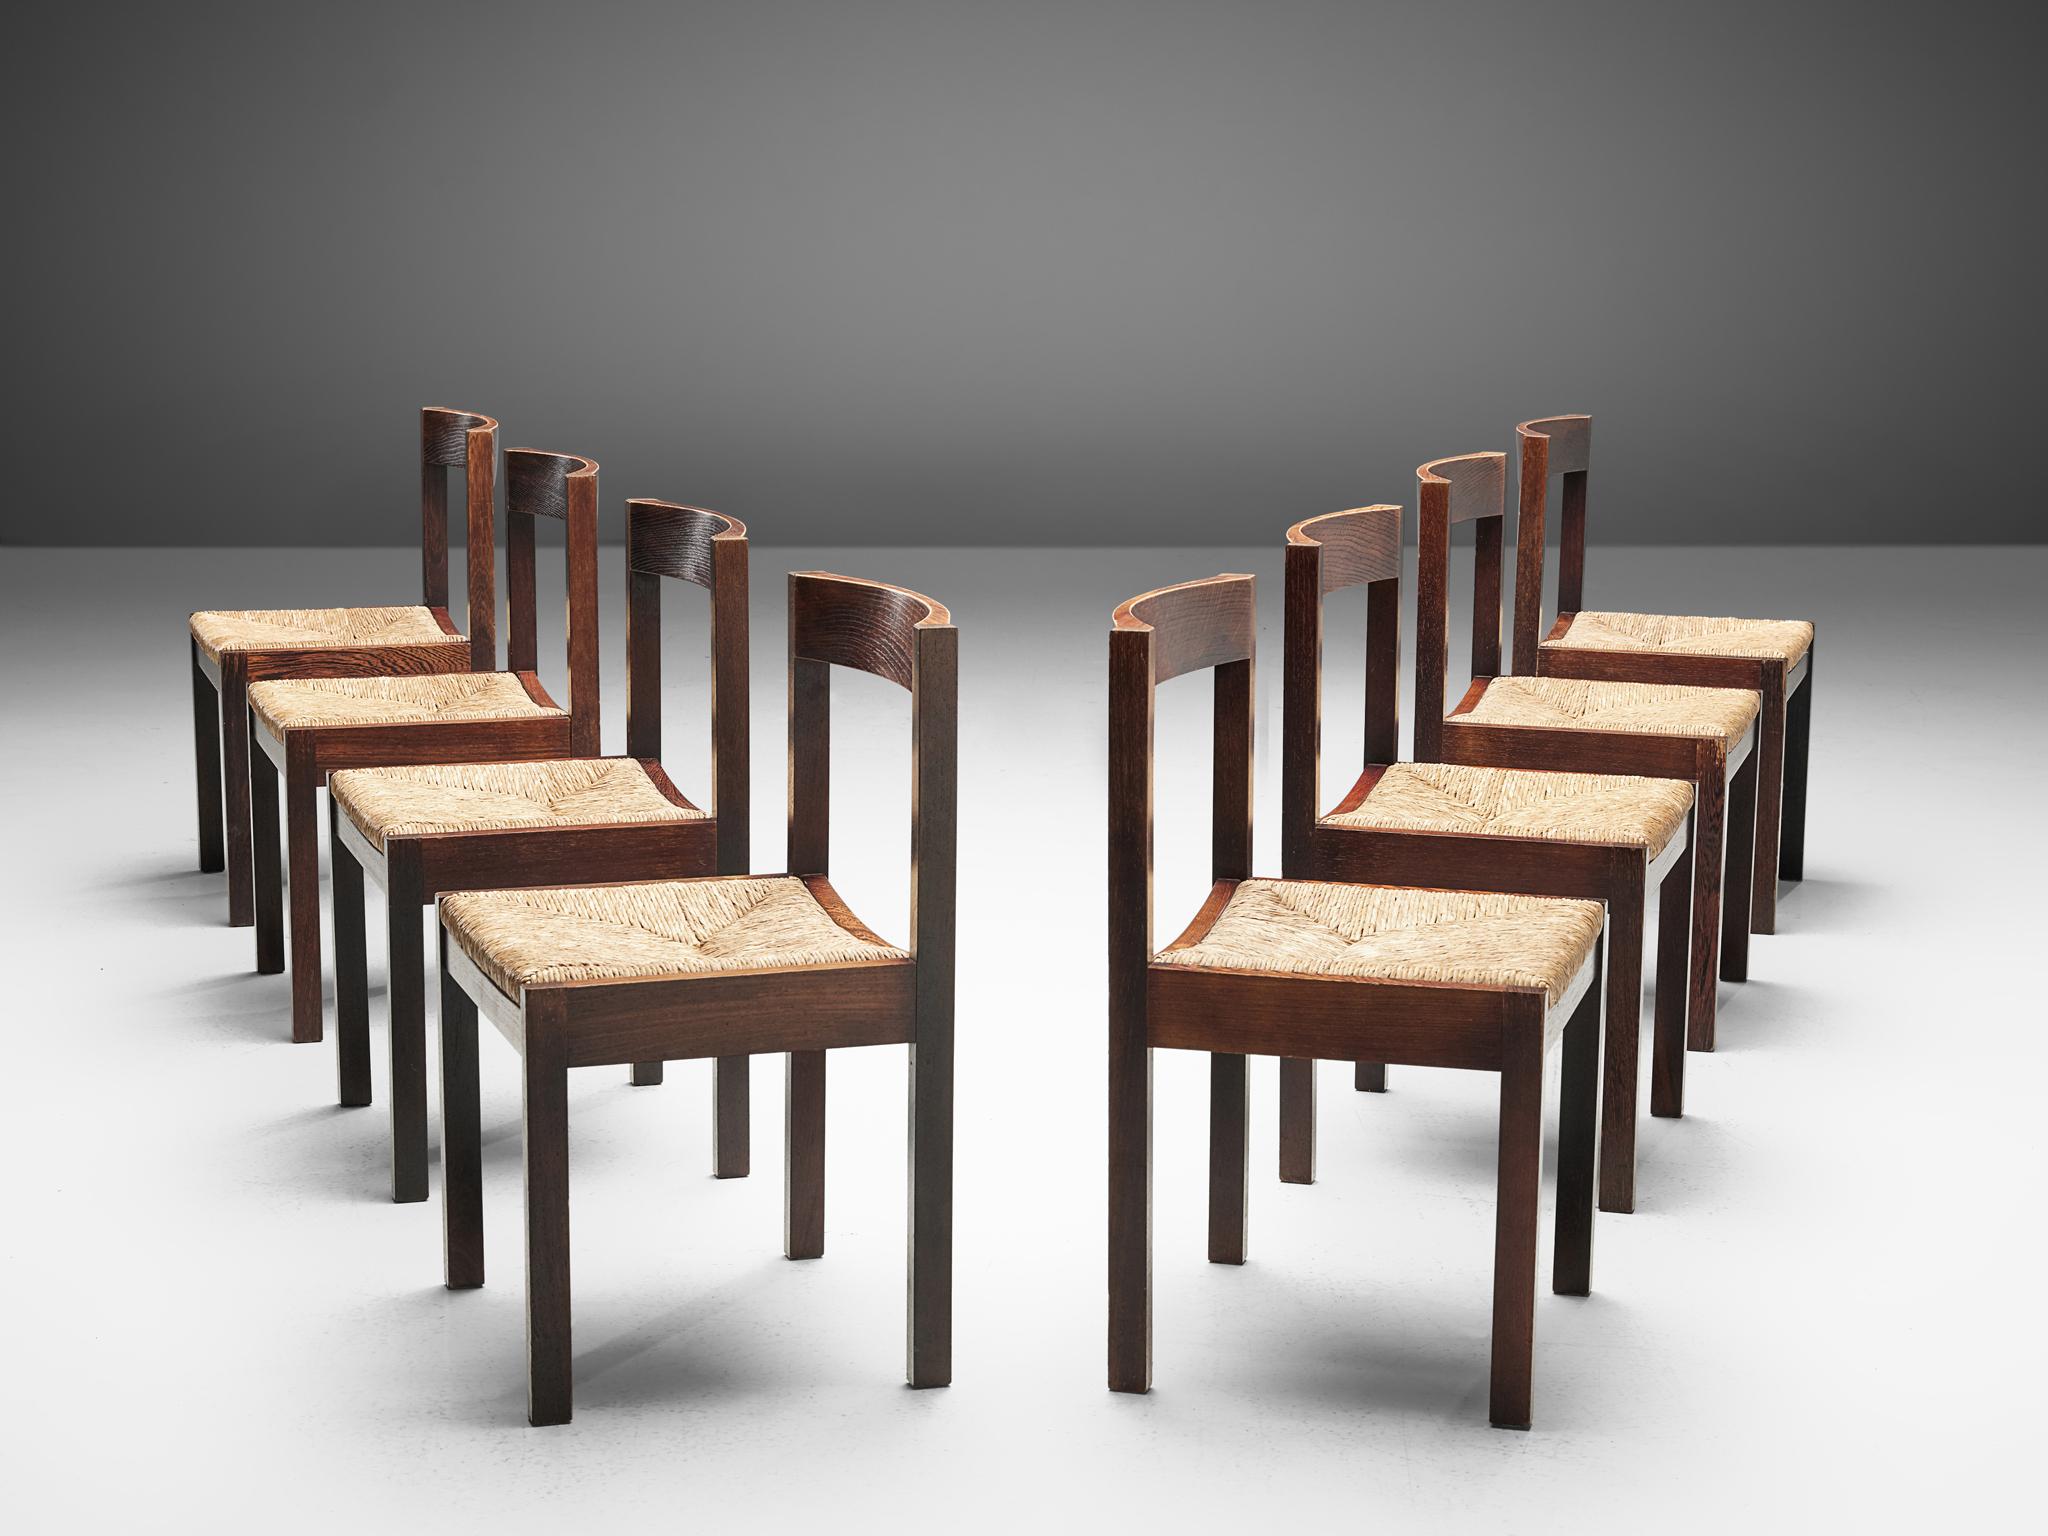 Martin Visser for 't Spectrum, set of 8 dining chairs, wengé and rattan, The Netherlands, 1960s.

A Dutch set of dining chairs that features a simplistic, modest design. The frame is made of wengé and features straight lines. Only the backrest is